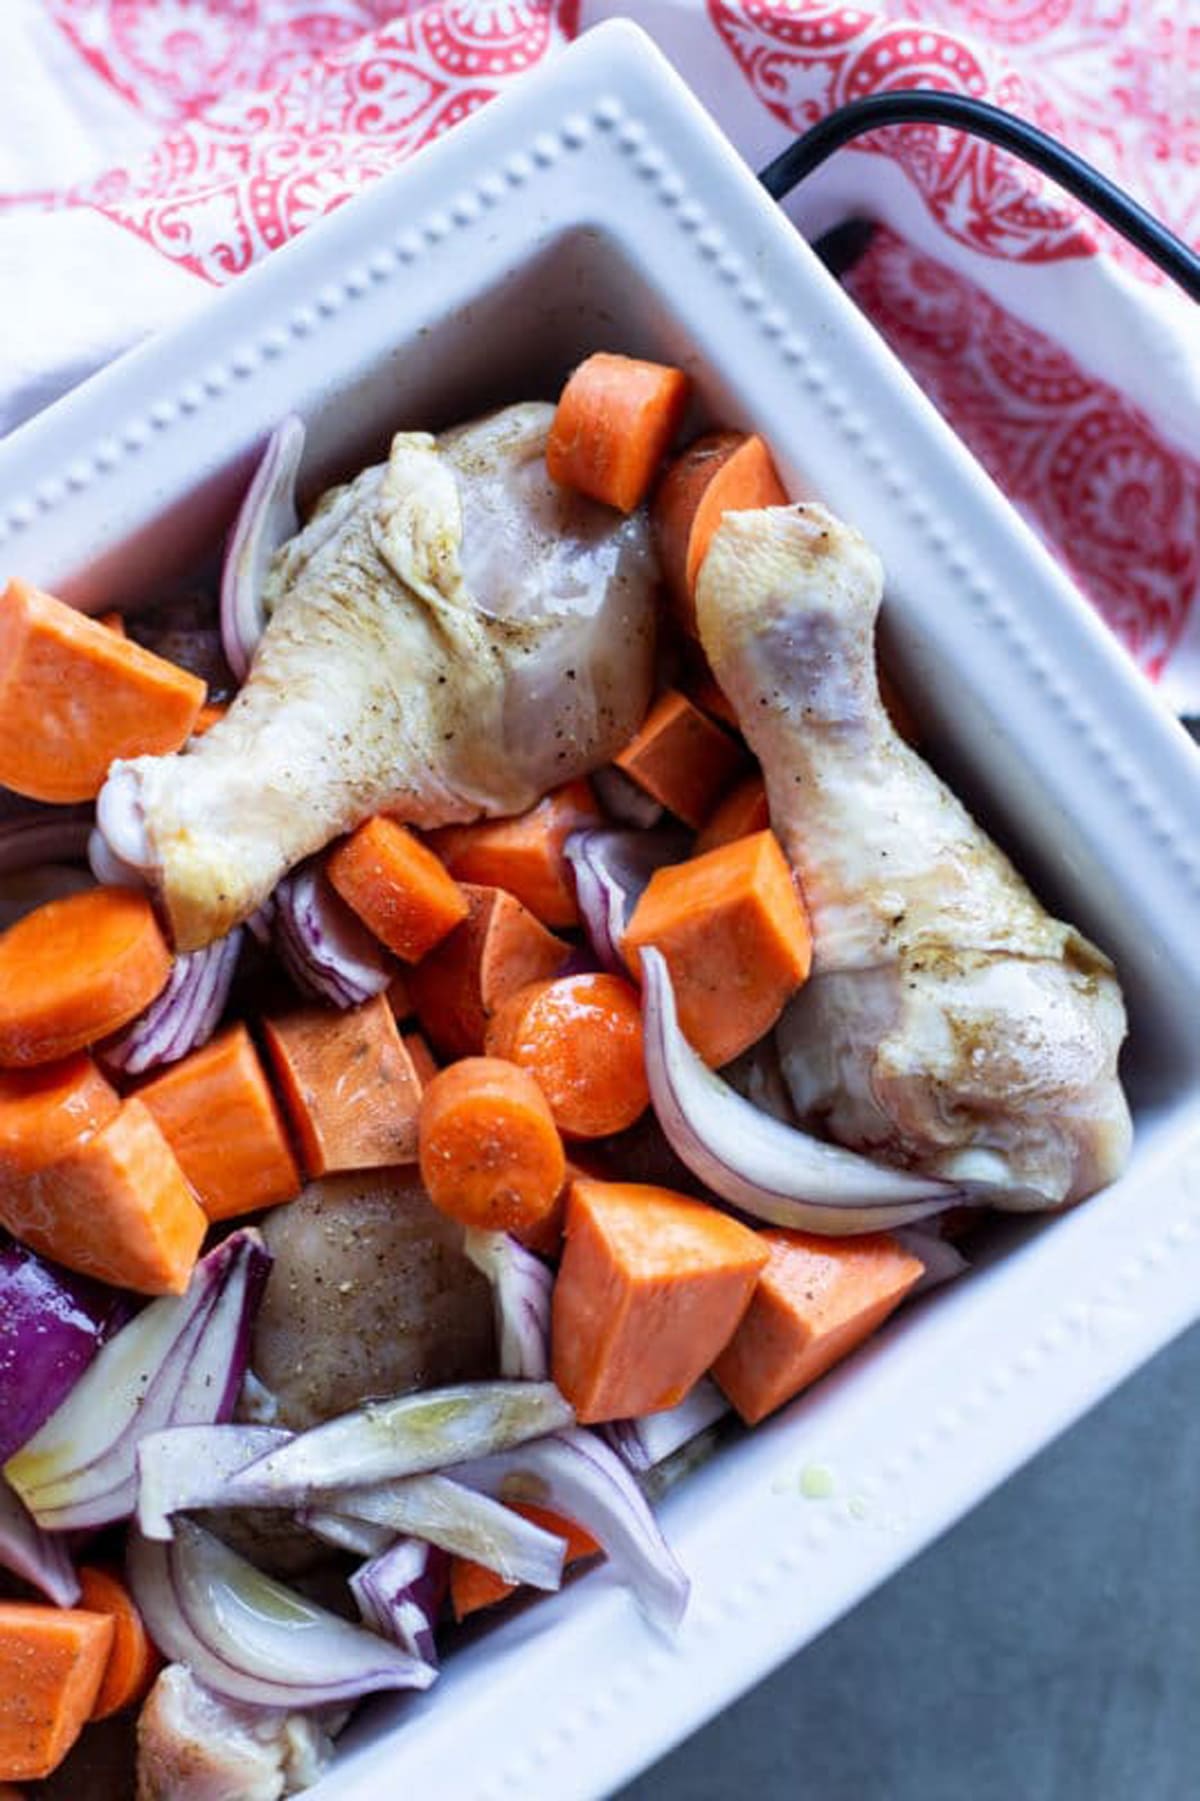 White dish containing seasoned drumsticks with sweet potatoes, carrots, and red onions drizzled with olive oil.